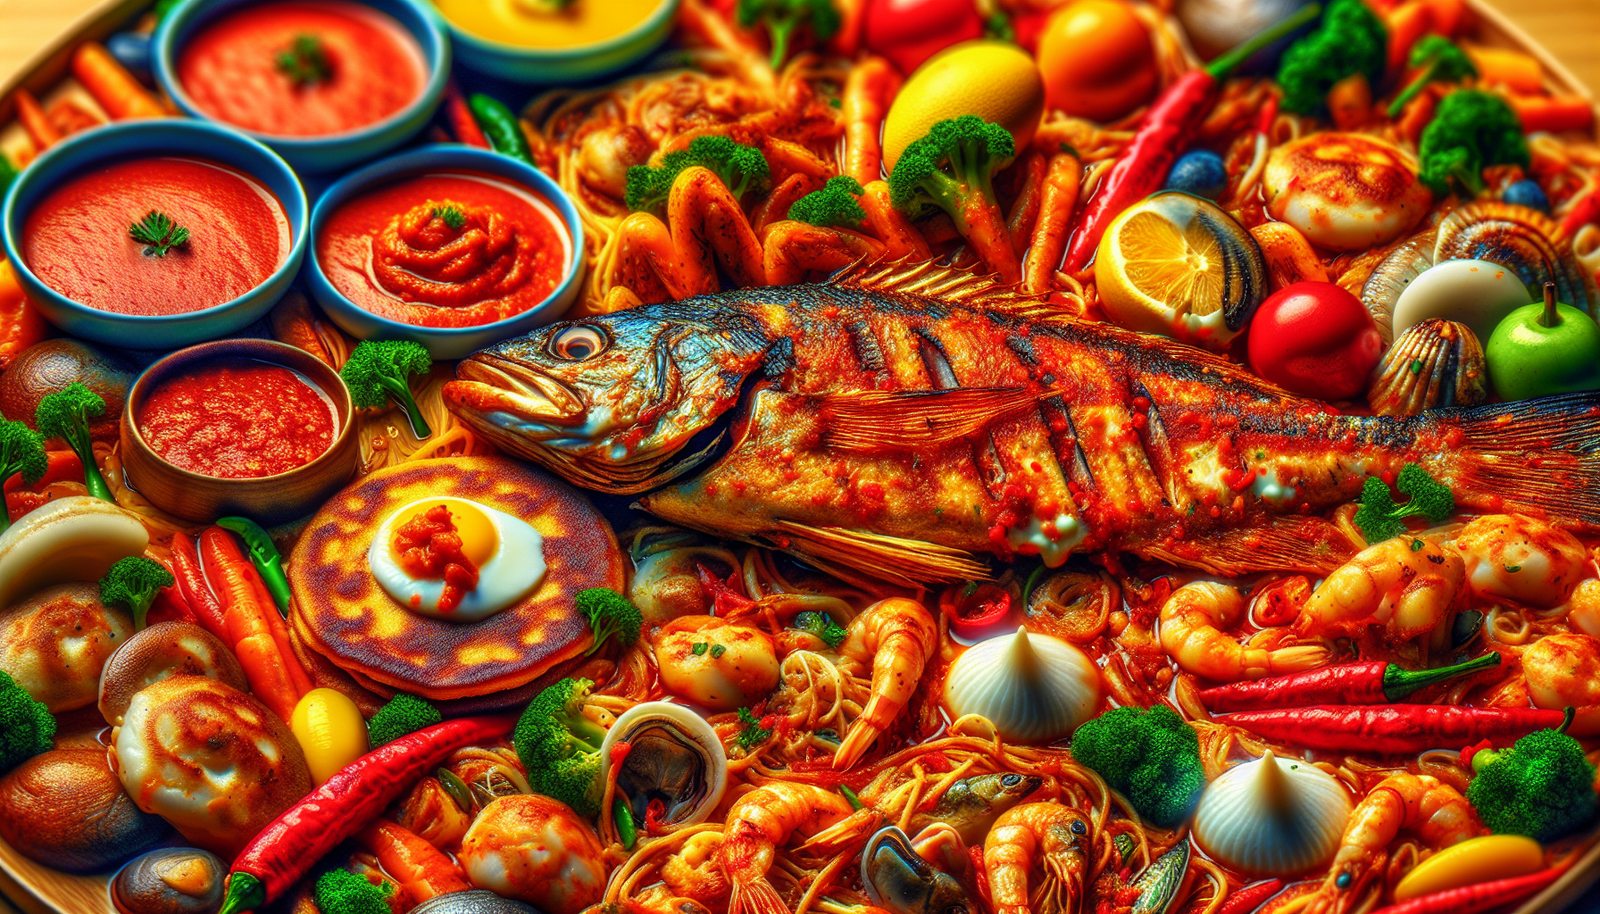 What Are Some Innovative Seafood Dishes Inspired By Korean Flavors?